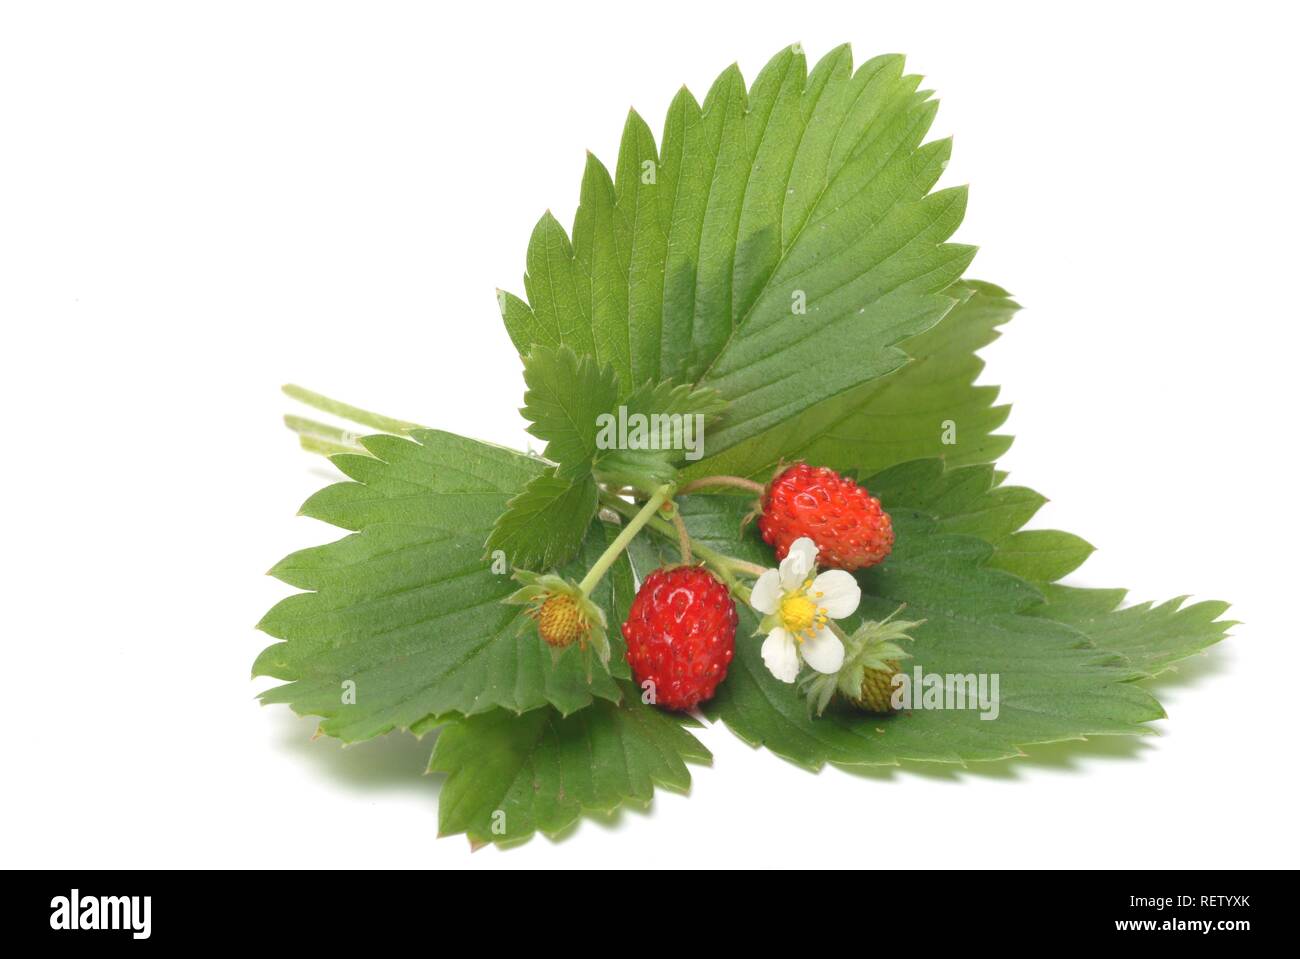 Woodland Strawberry (Fragaria vesca) with leaf and blossom Stock Photo